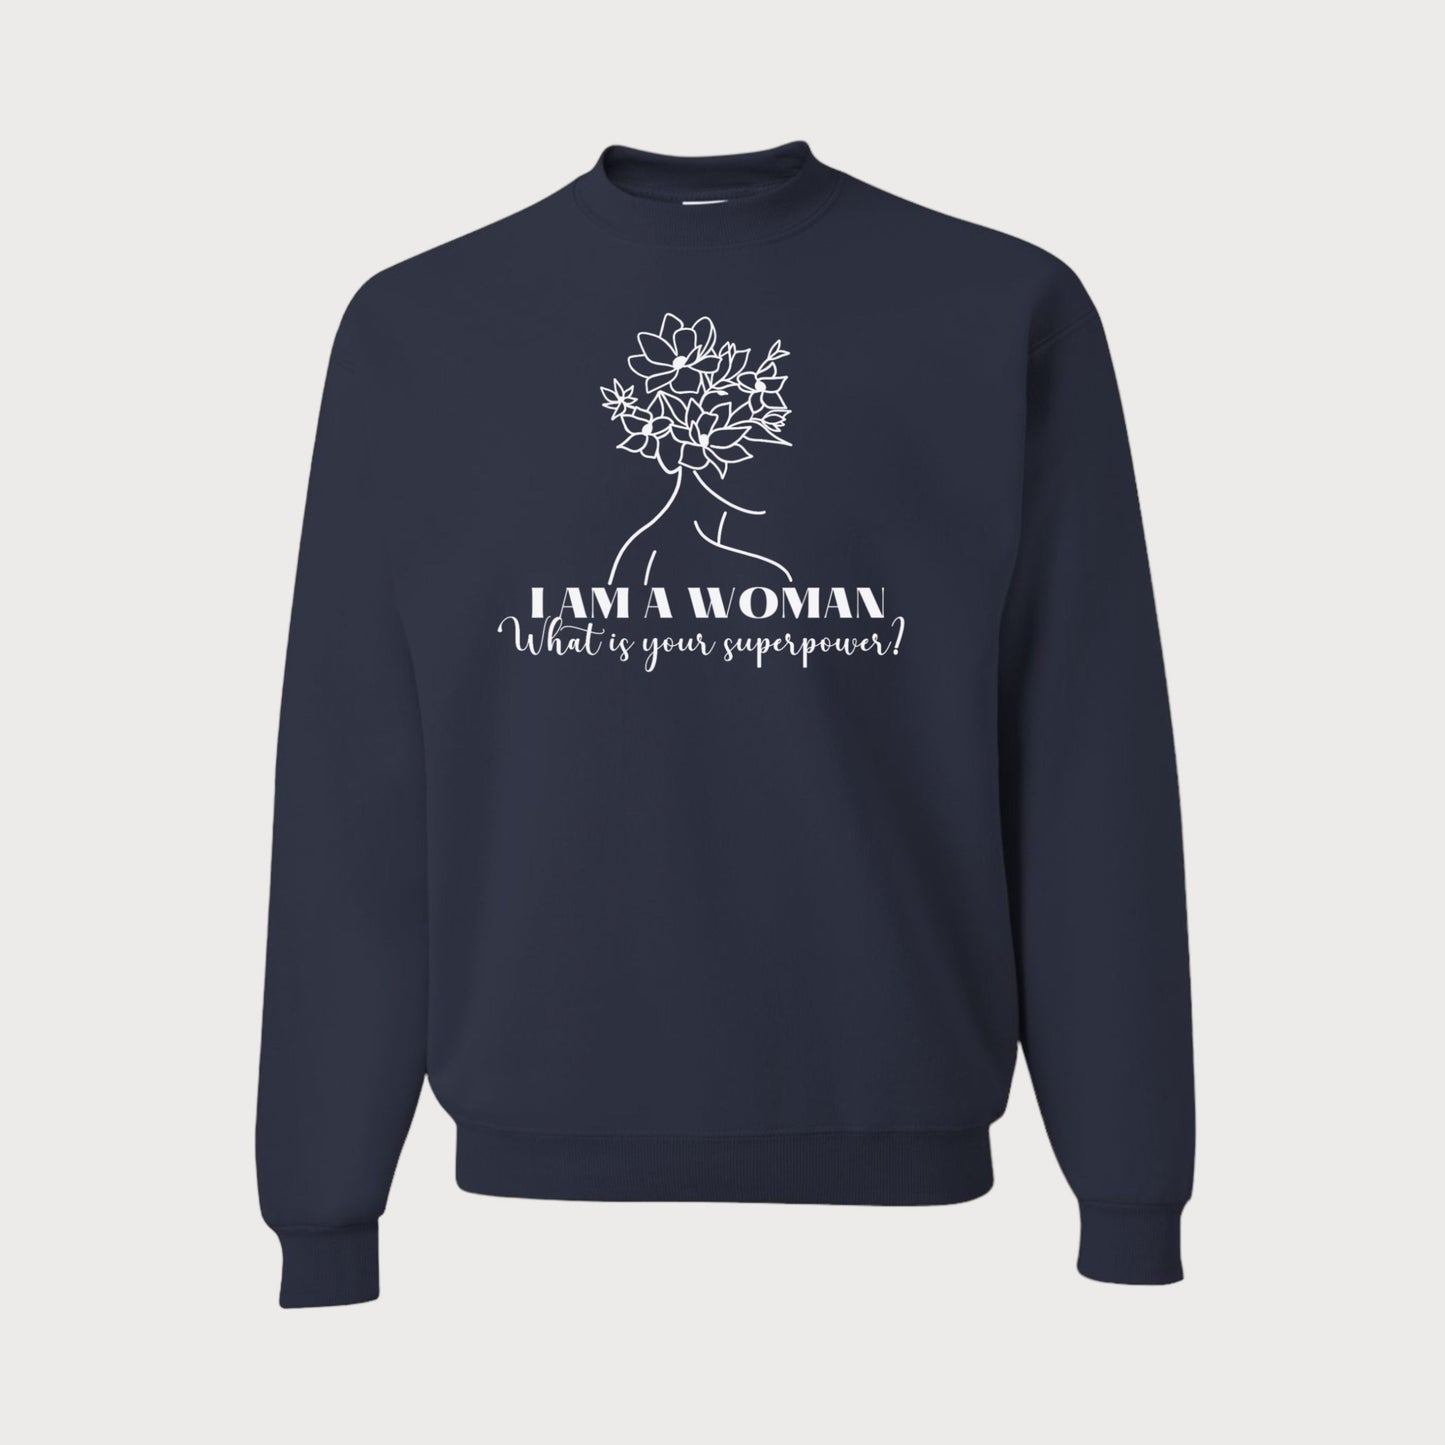 I Am A Woman What Is Your Superpower? Crewneck Sweatshirt in Navy Blue color